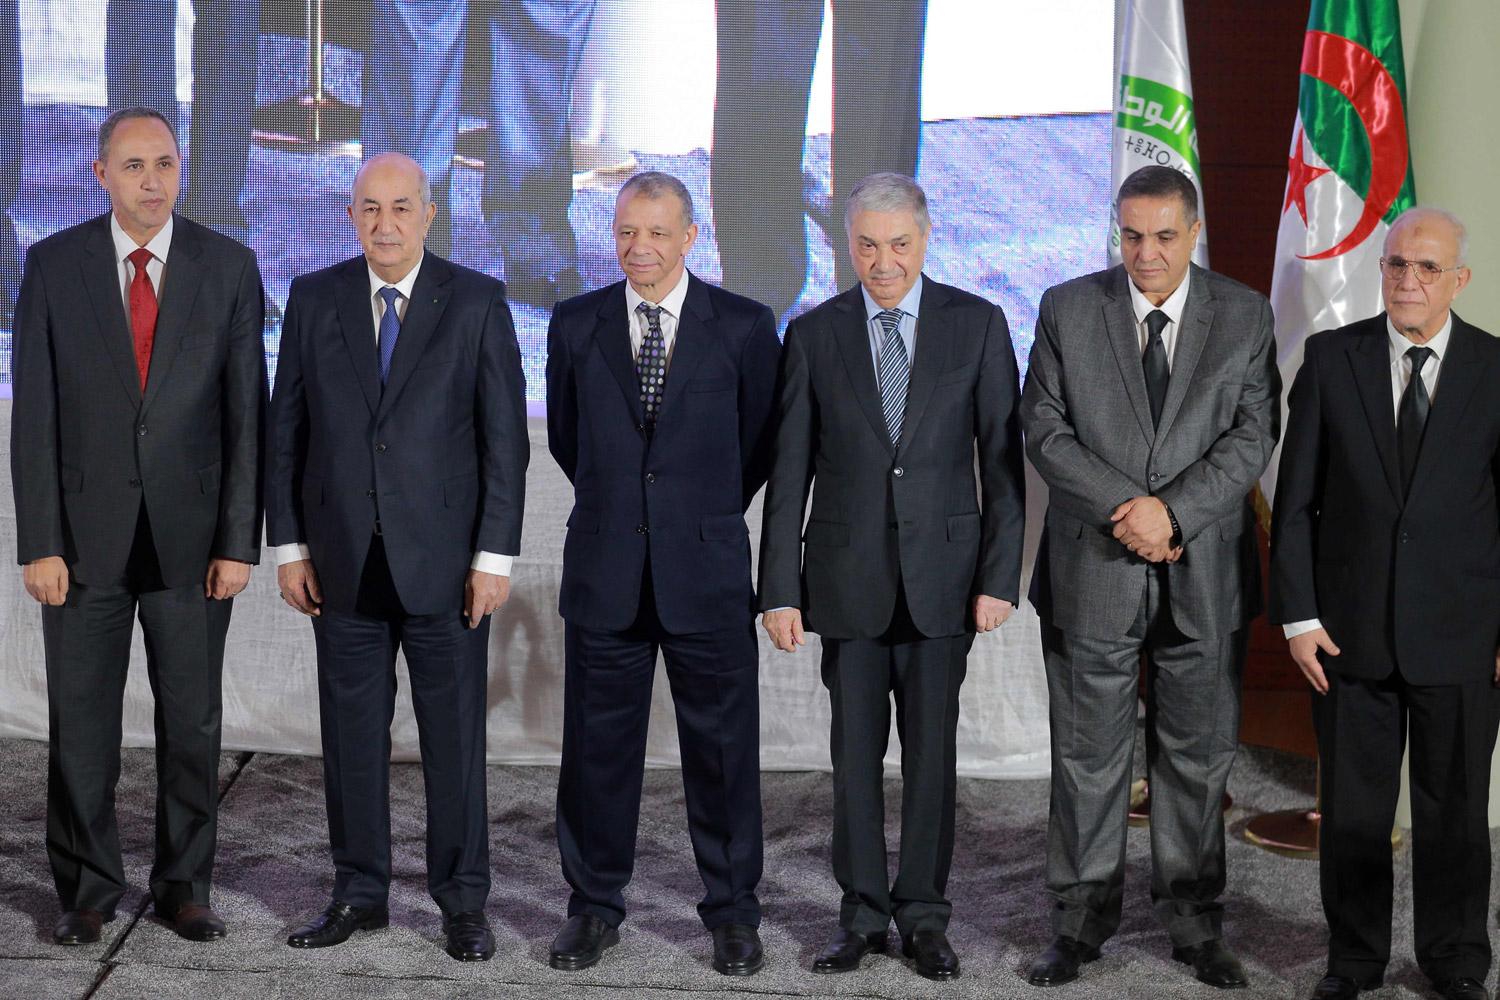 To protesters' disappointment, all five candidates seeking to replace Bouteflika are known to have links to him